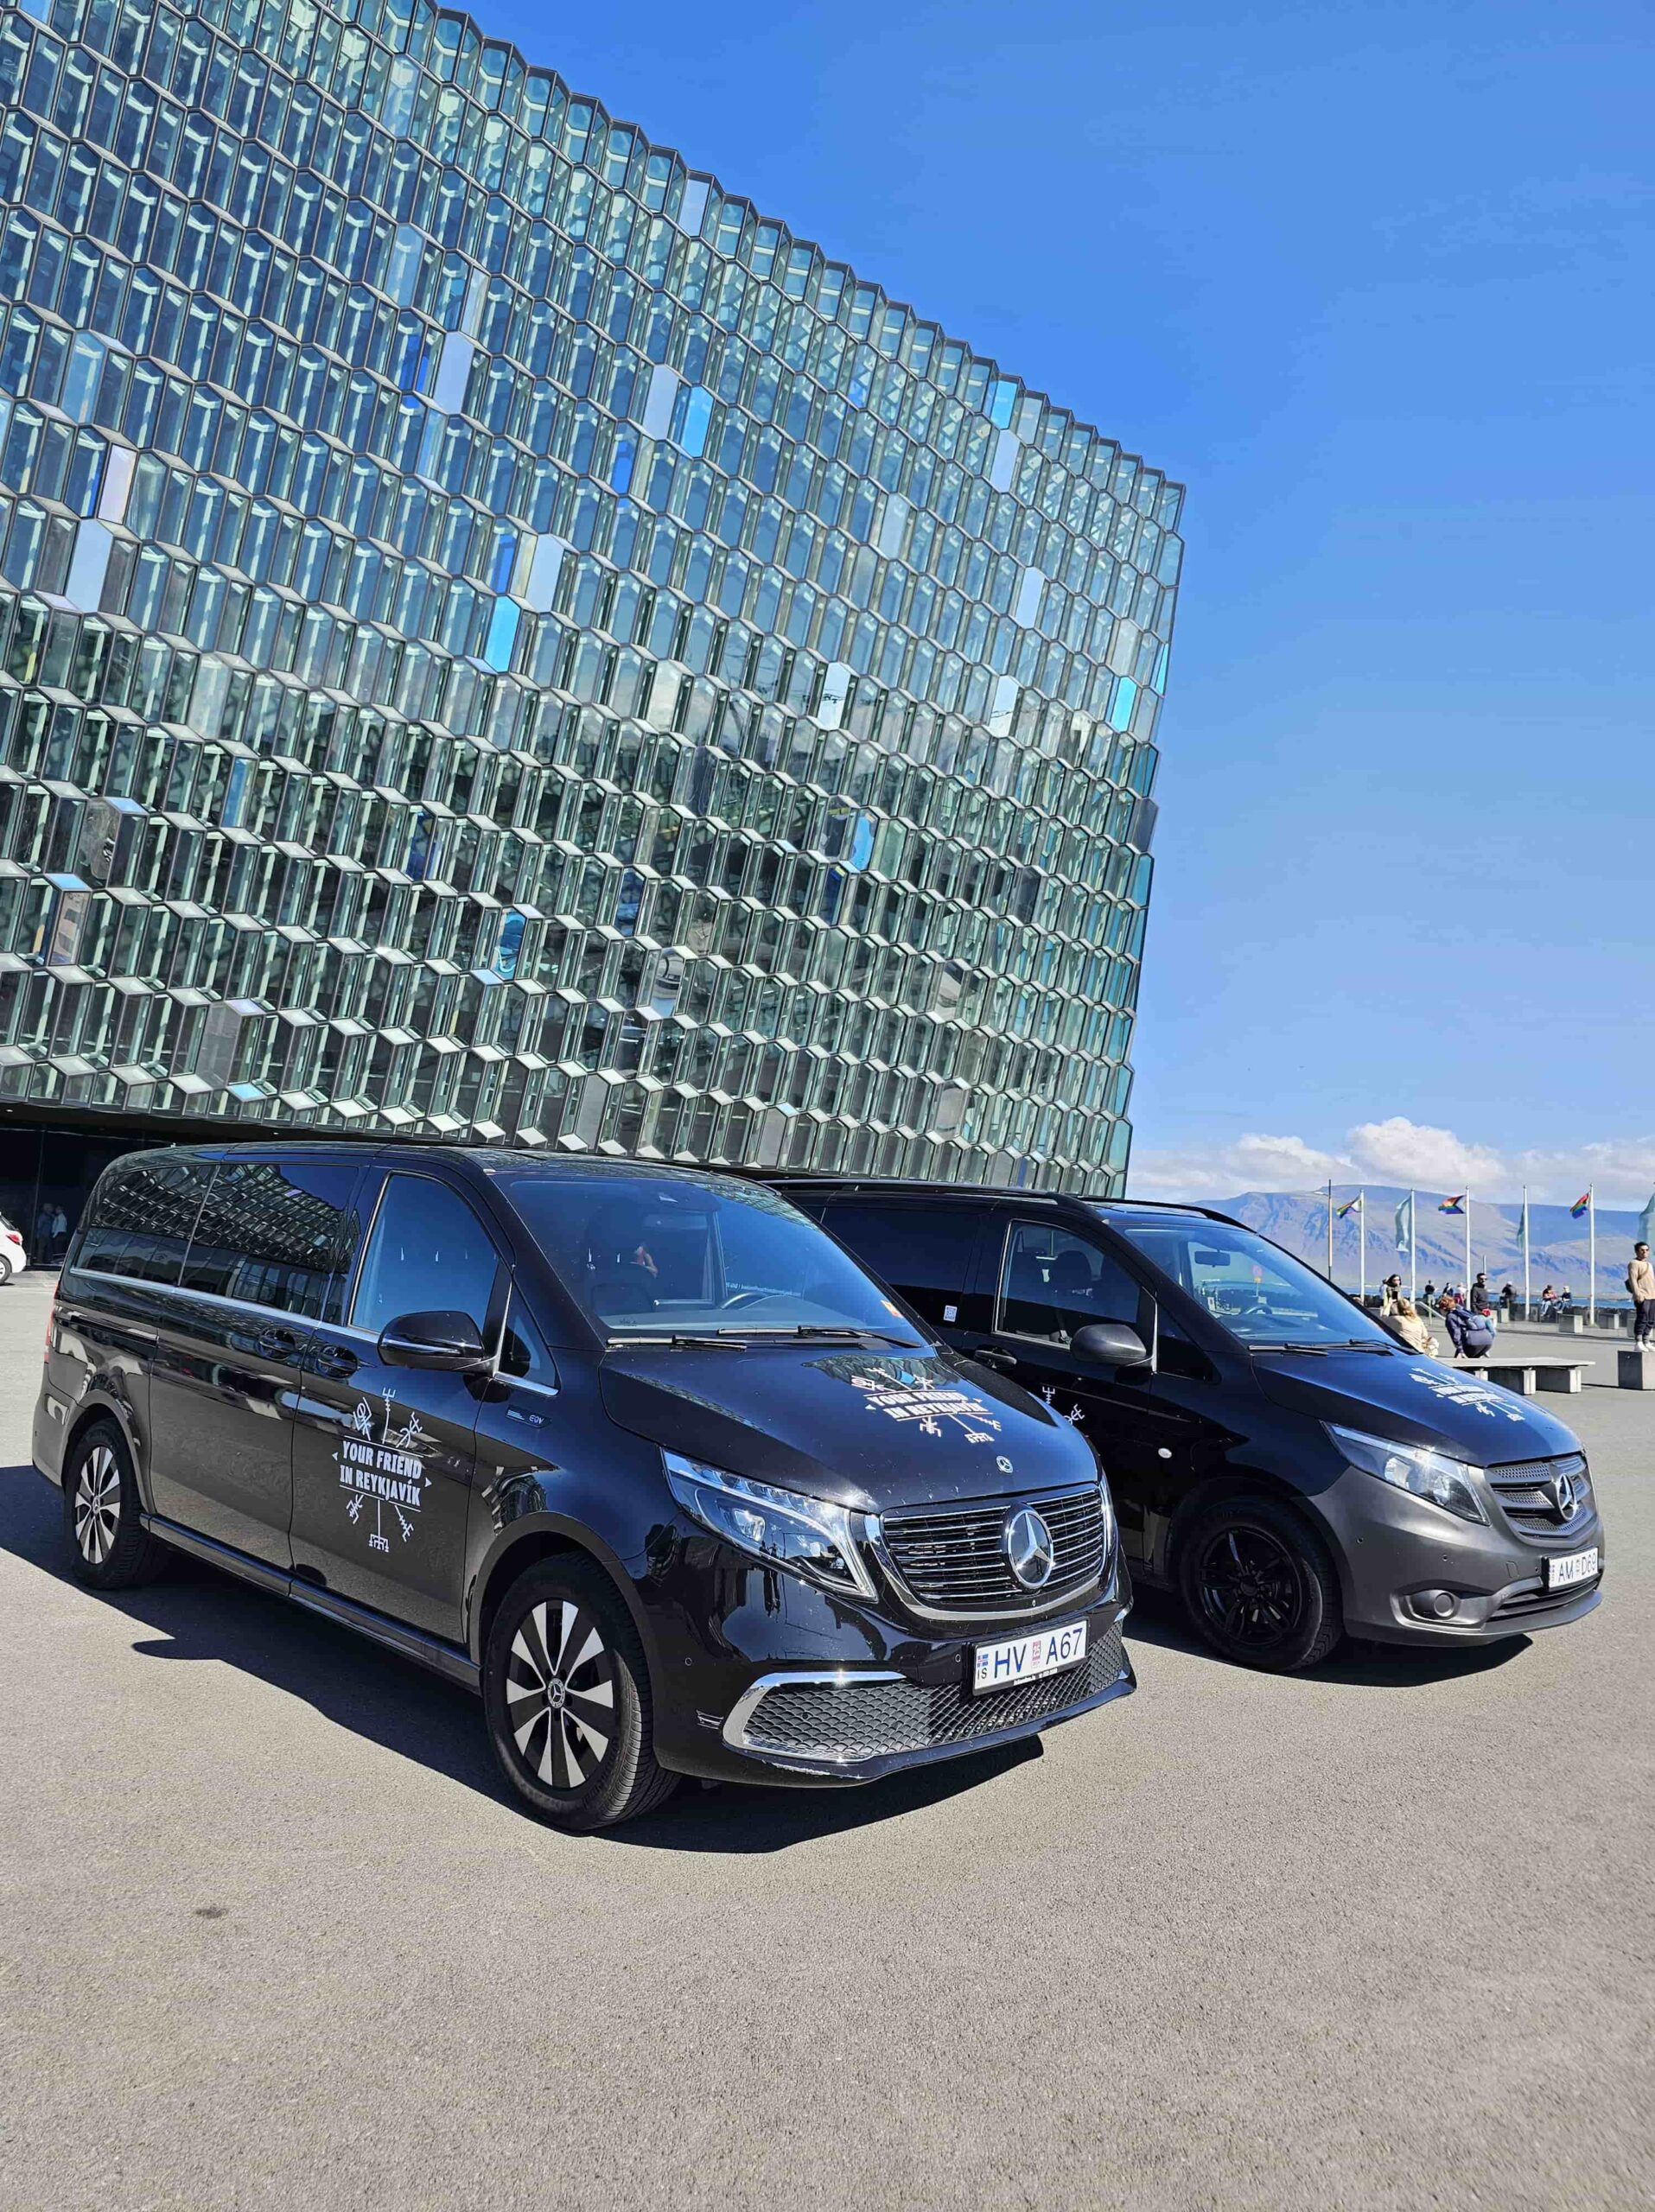 Two Tour Vehicles from Your Friend in Reykjavik parked in front of the Harpa Concert Hall in Reykjavik